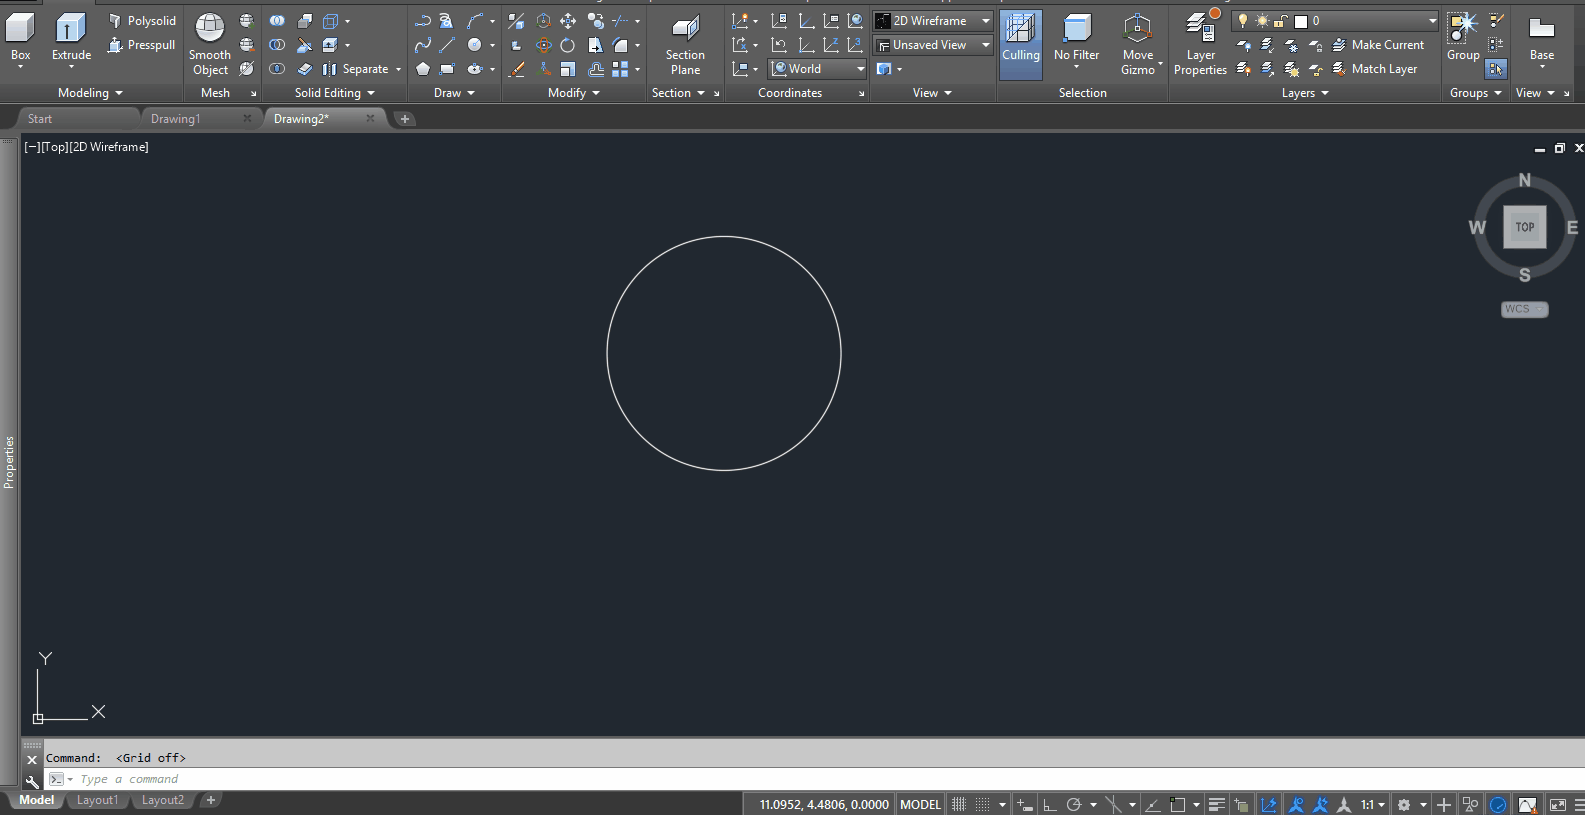 Solved: How to locate and keep center point of circle or arc visible ...